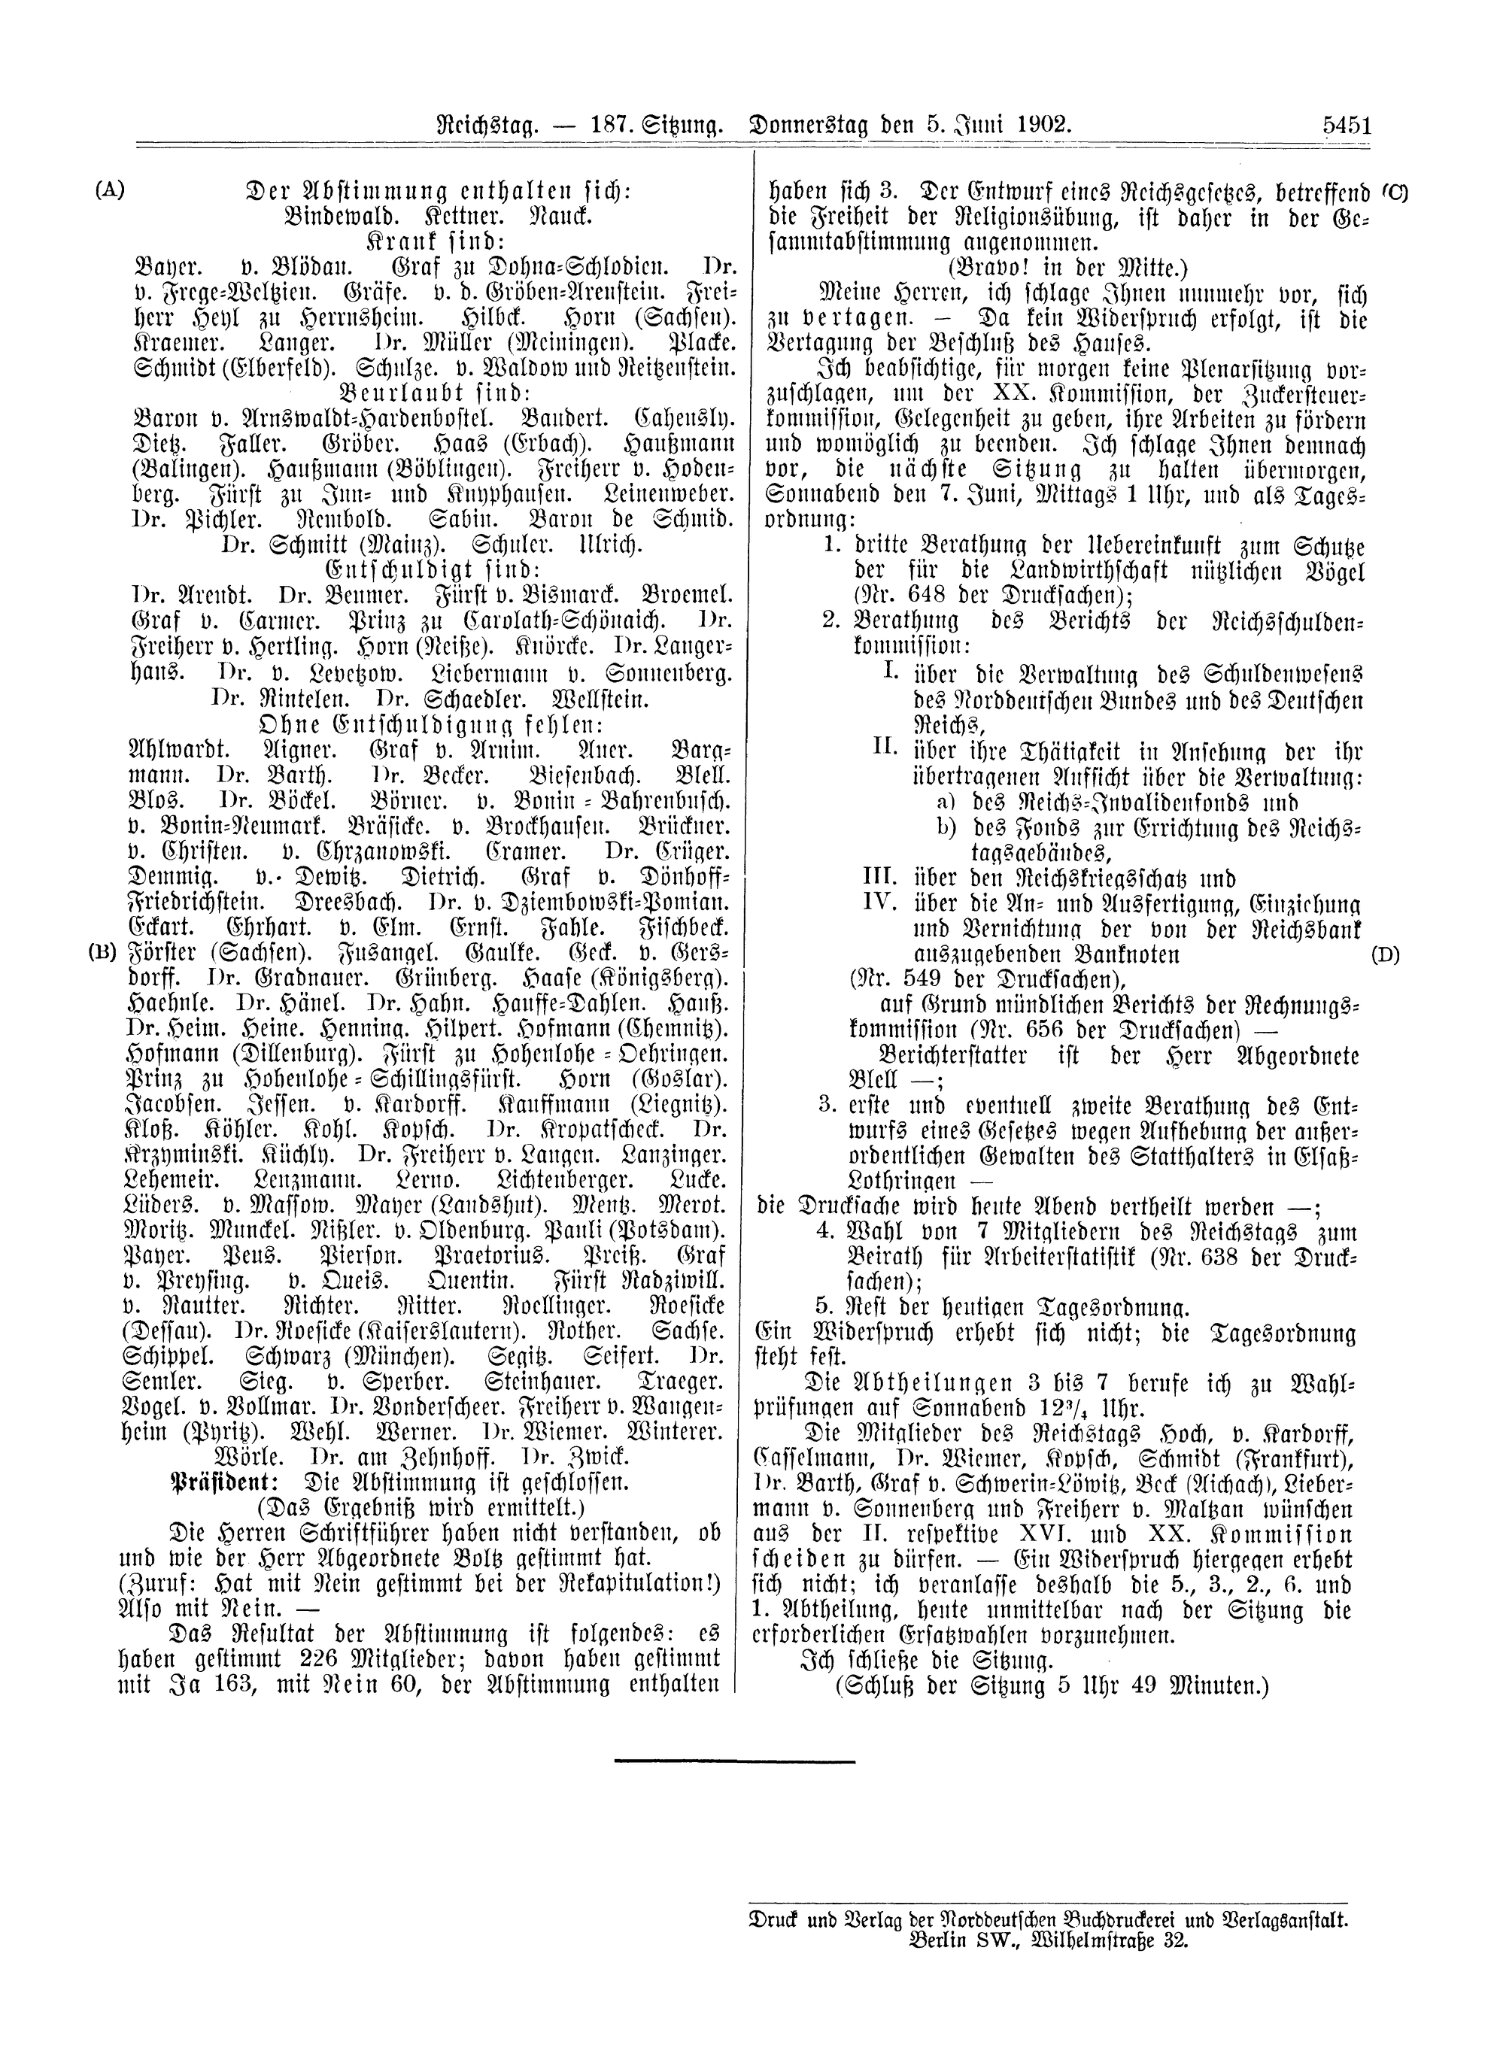 Scan of page 5451